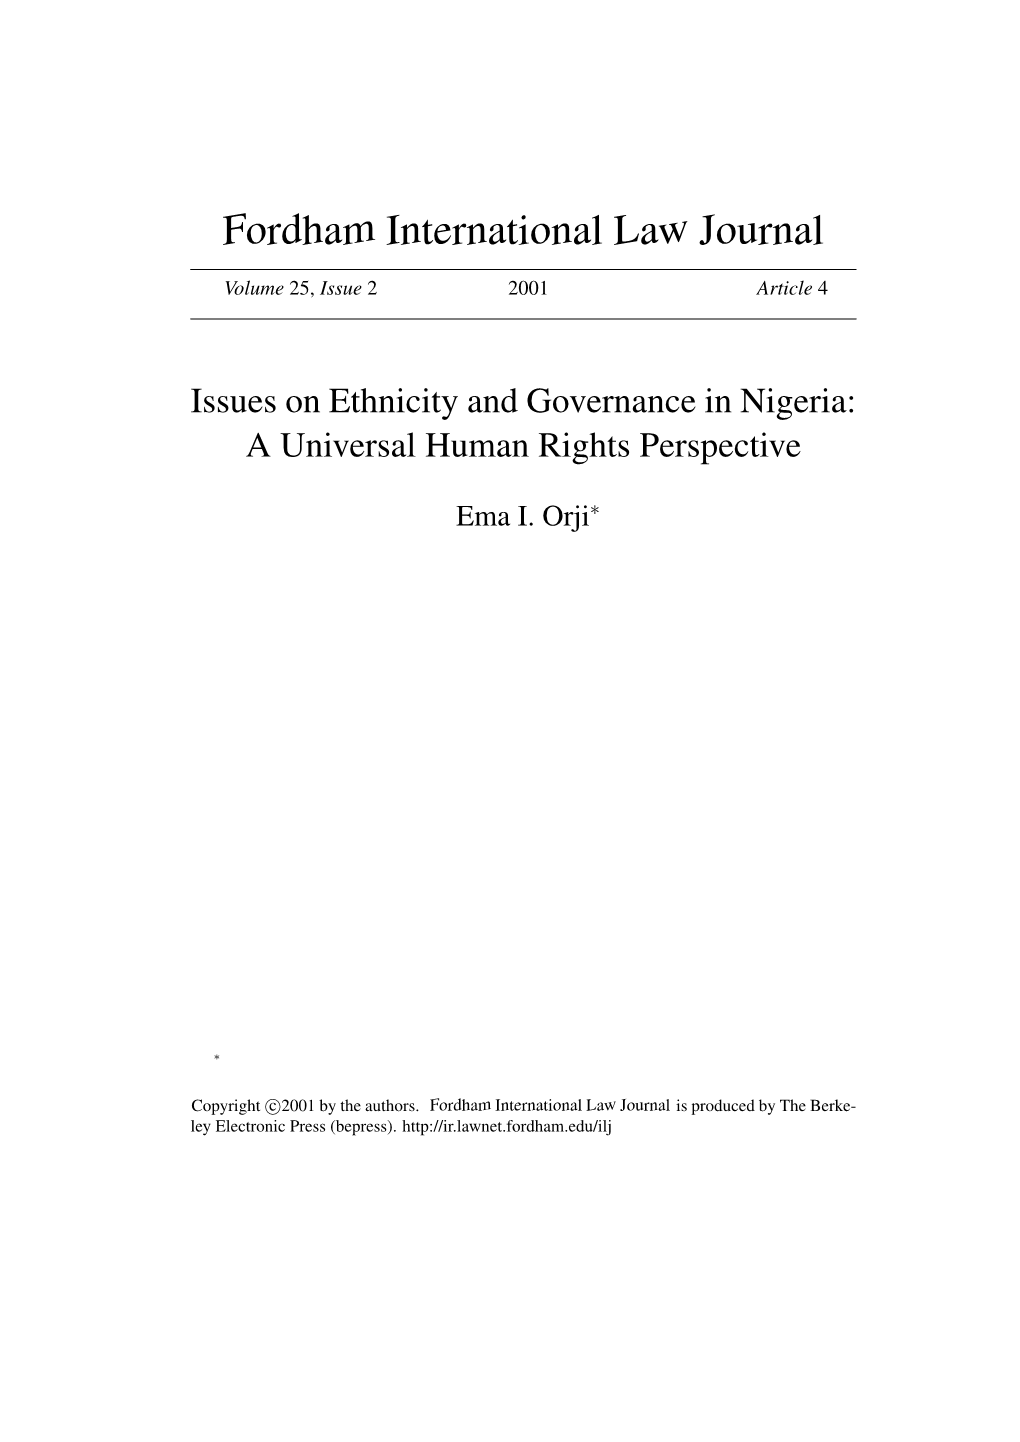 Issues on Ethnicity and Governance in Nigeria: a Universal Human Rights Perspective